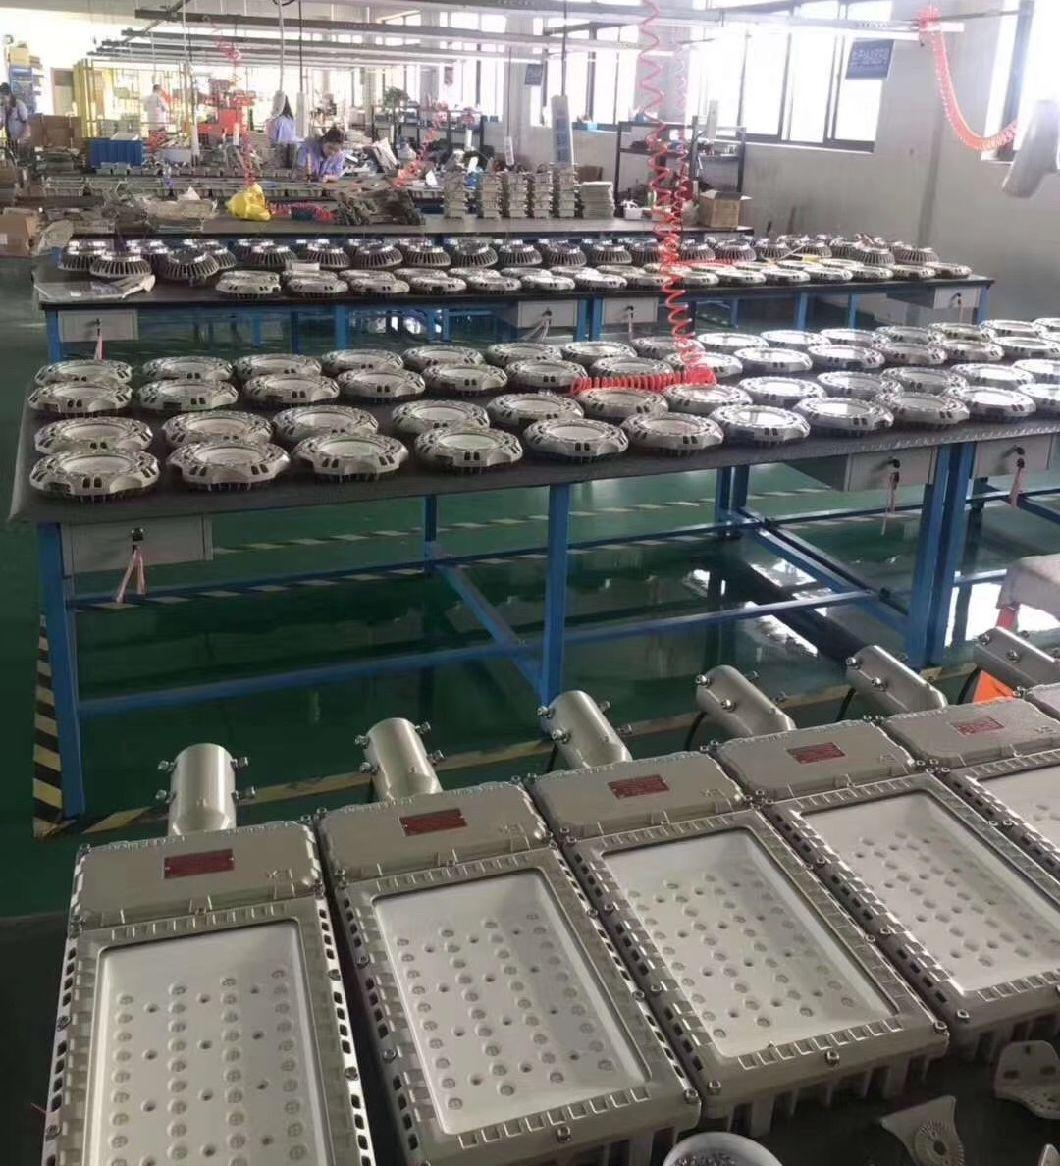 Energy Saving 4000K IP67 Explosion Proof LED Light Fixtures for Hazardous Location Lighting Solution Such Infrastructure, Manufacturing, Mining, Oil & Gas etc